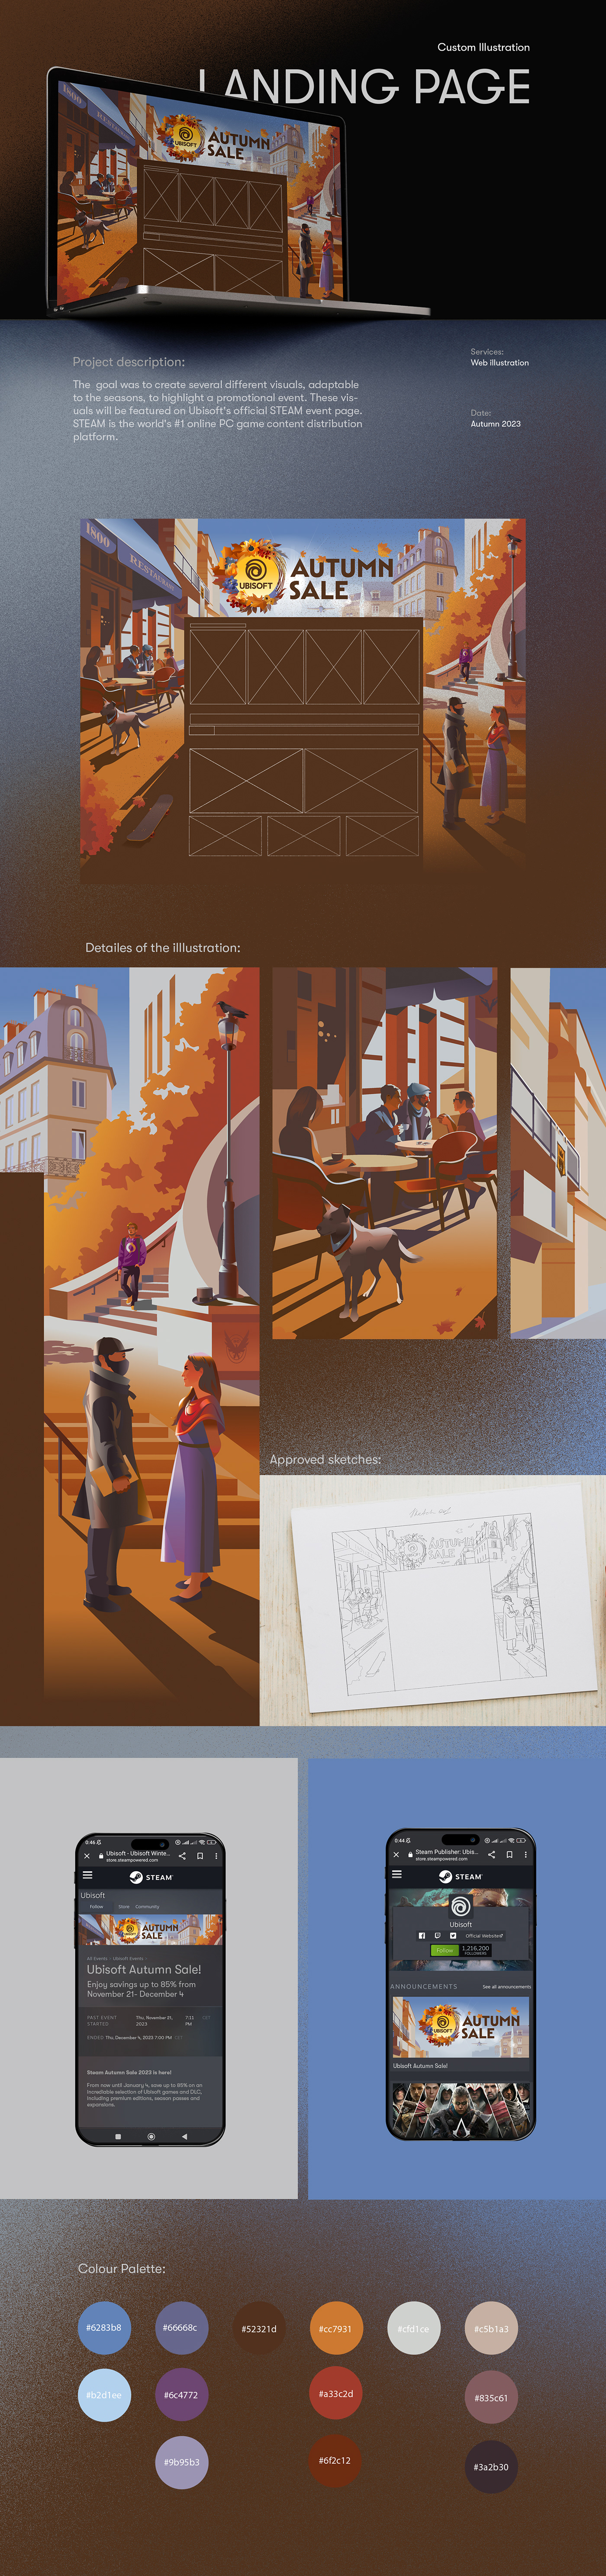 sunny autumn day , people sitting in the parisian cafe. Characters from video games.